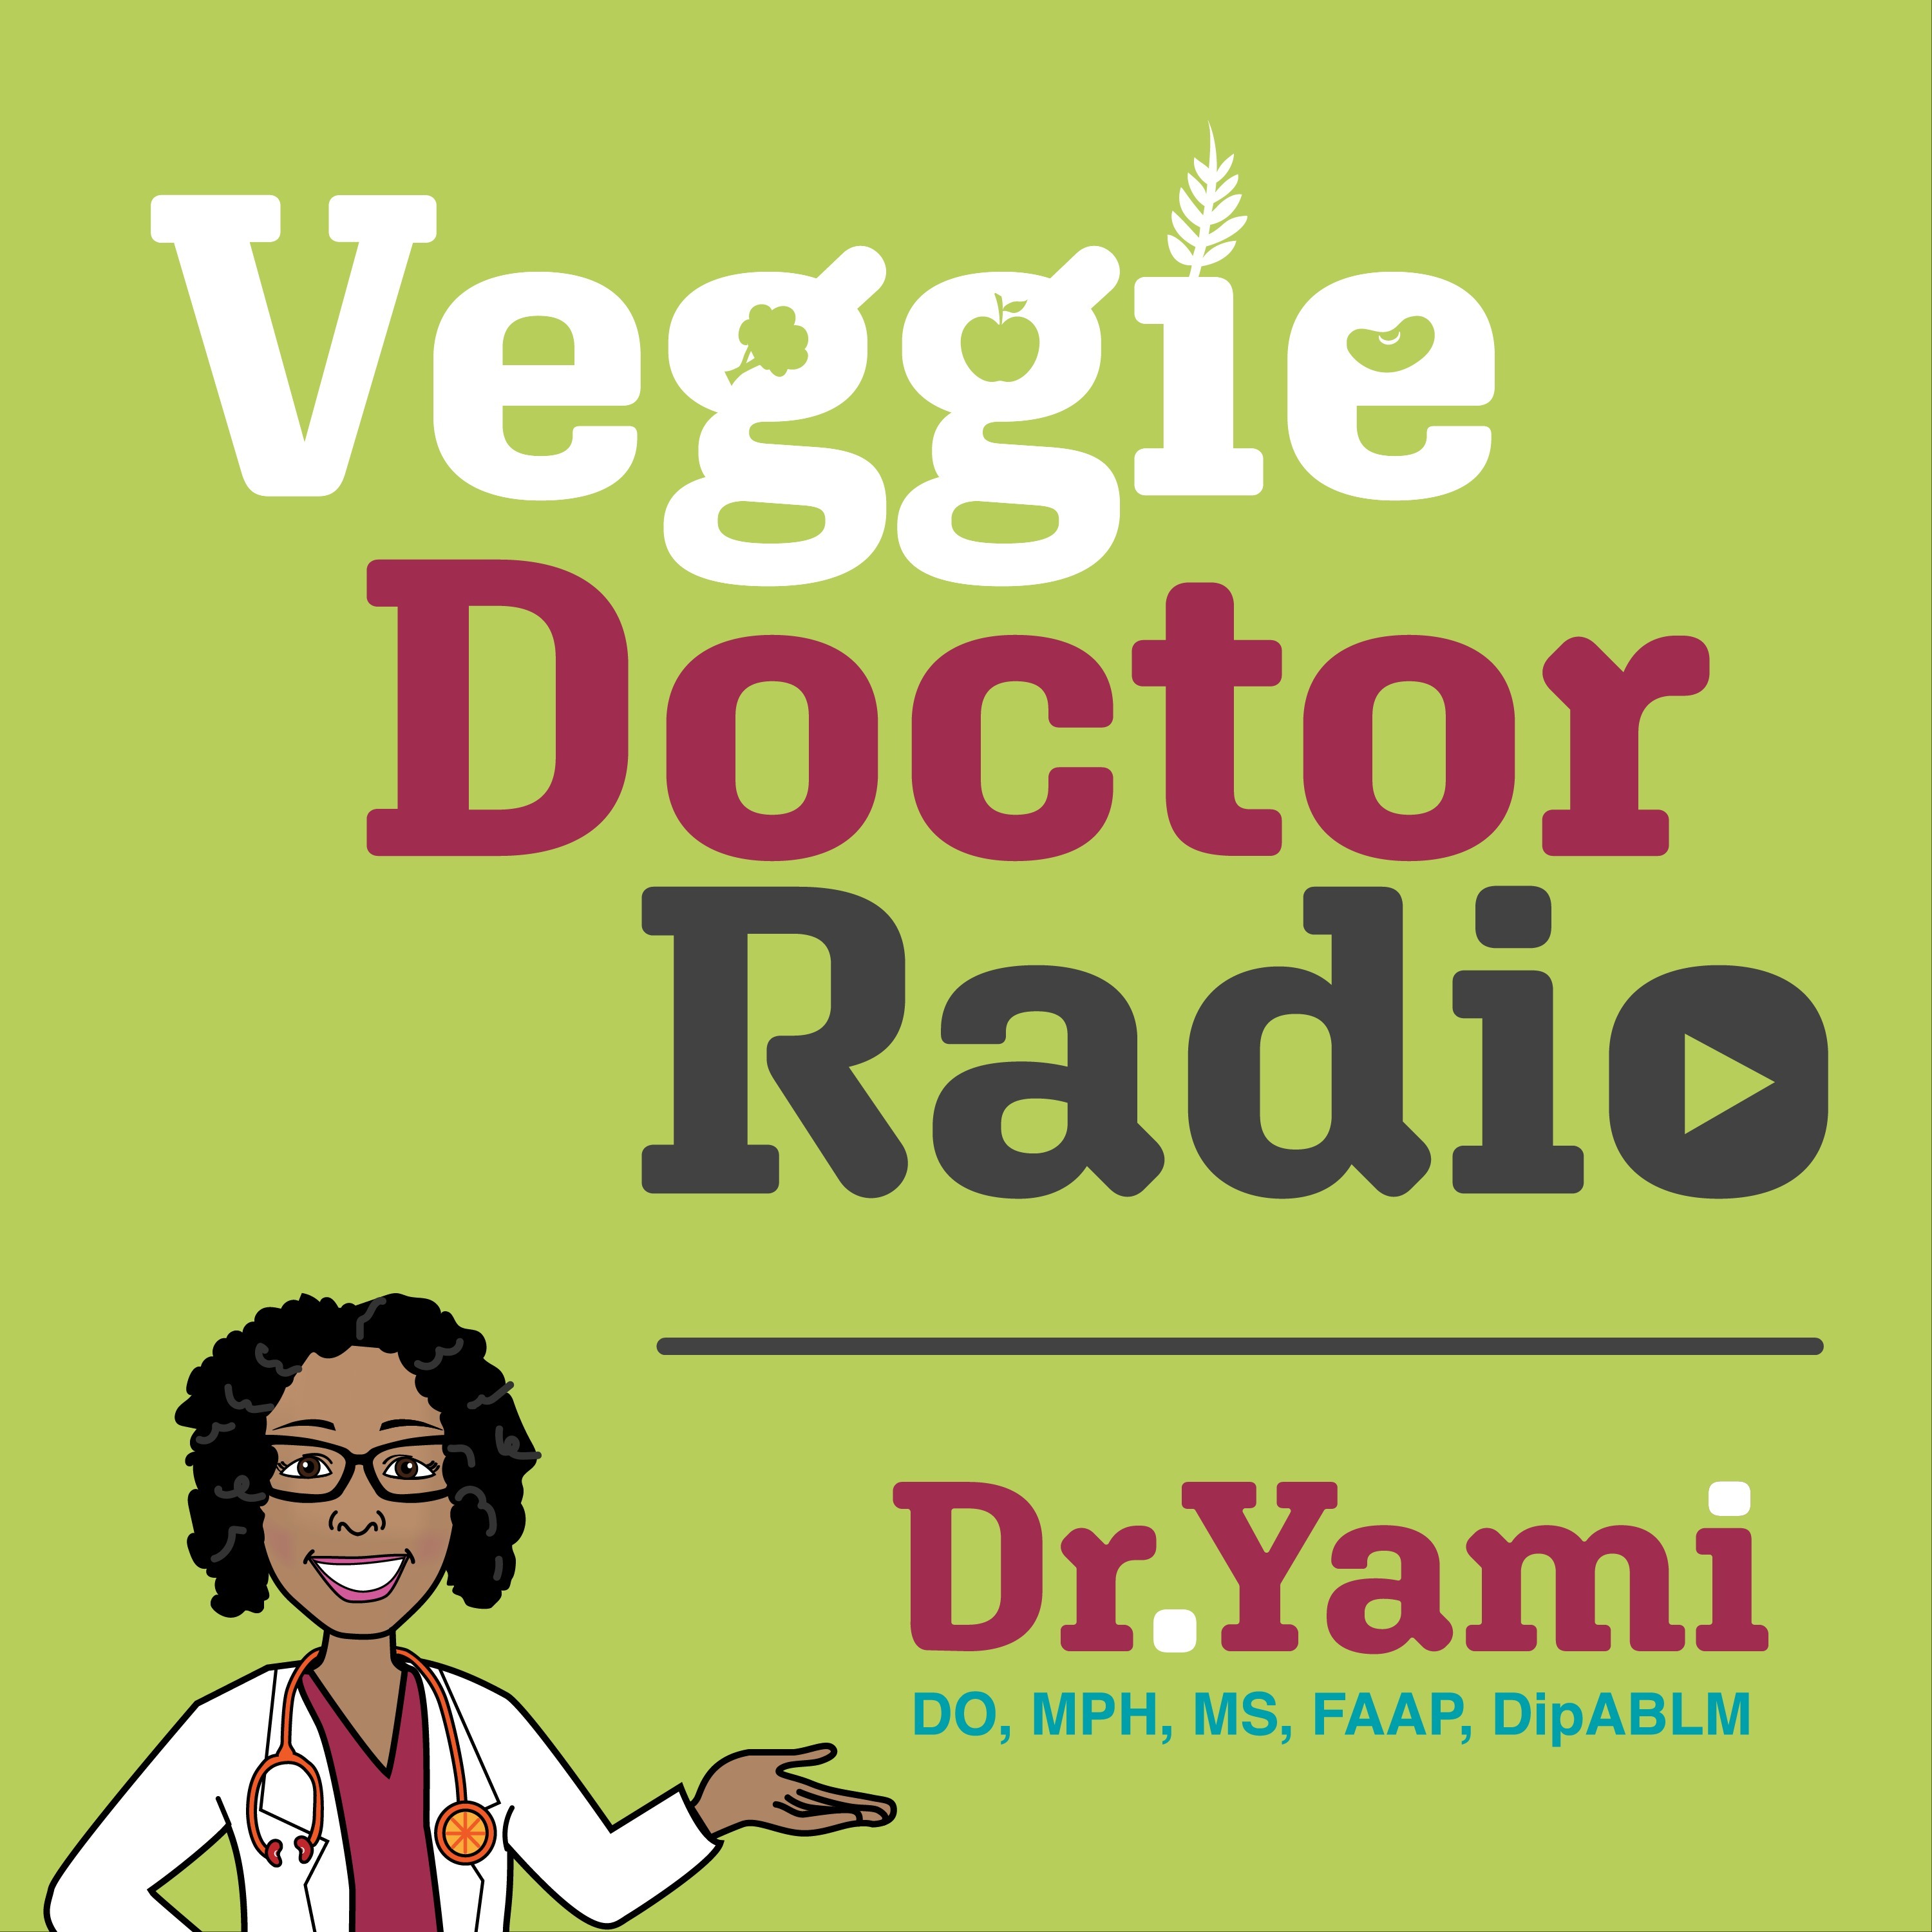 62: Intuitive Eating: A path to Freedom, Joy & Sustainability (Veggie Doctor Radio)